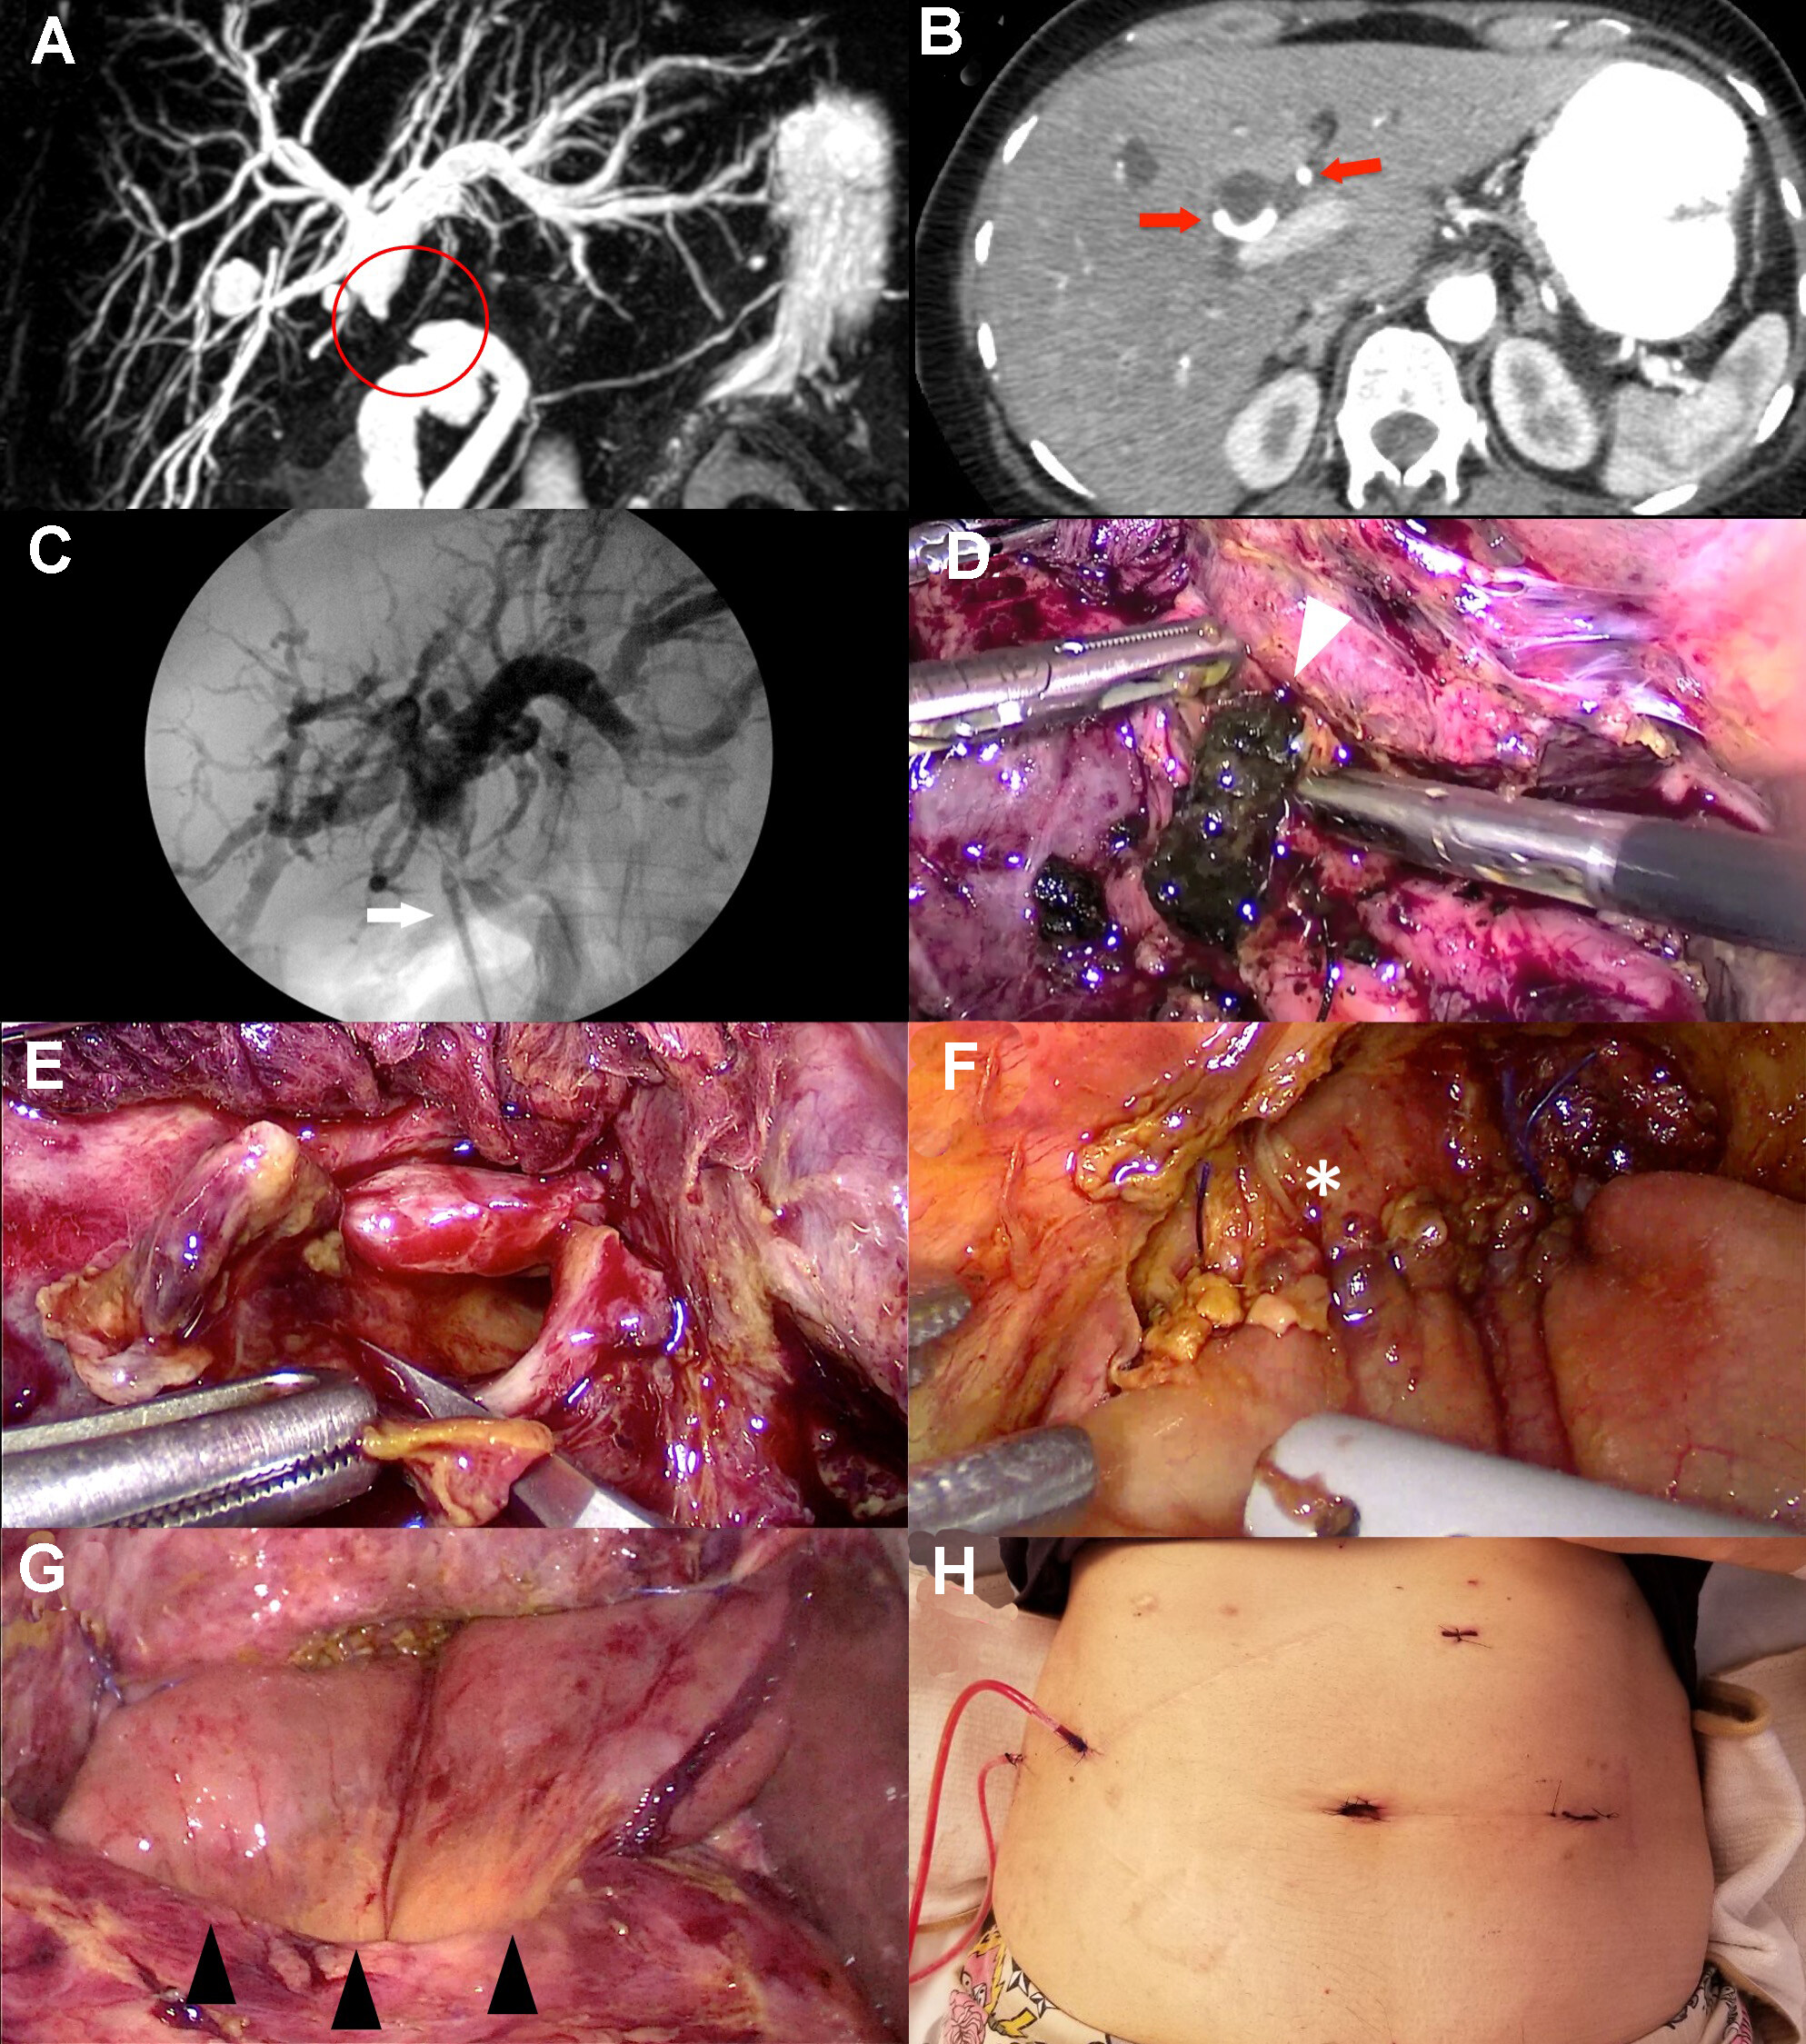 Laparoscopic hepaticojejunostomy for the treatment of bile duct injuries in difficult scenarios (with video)